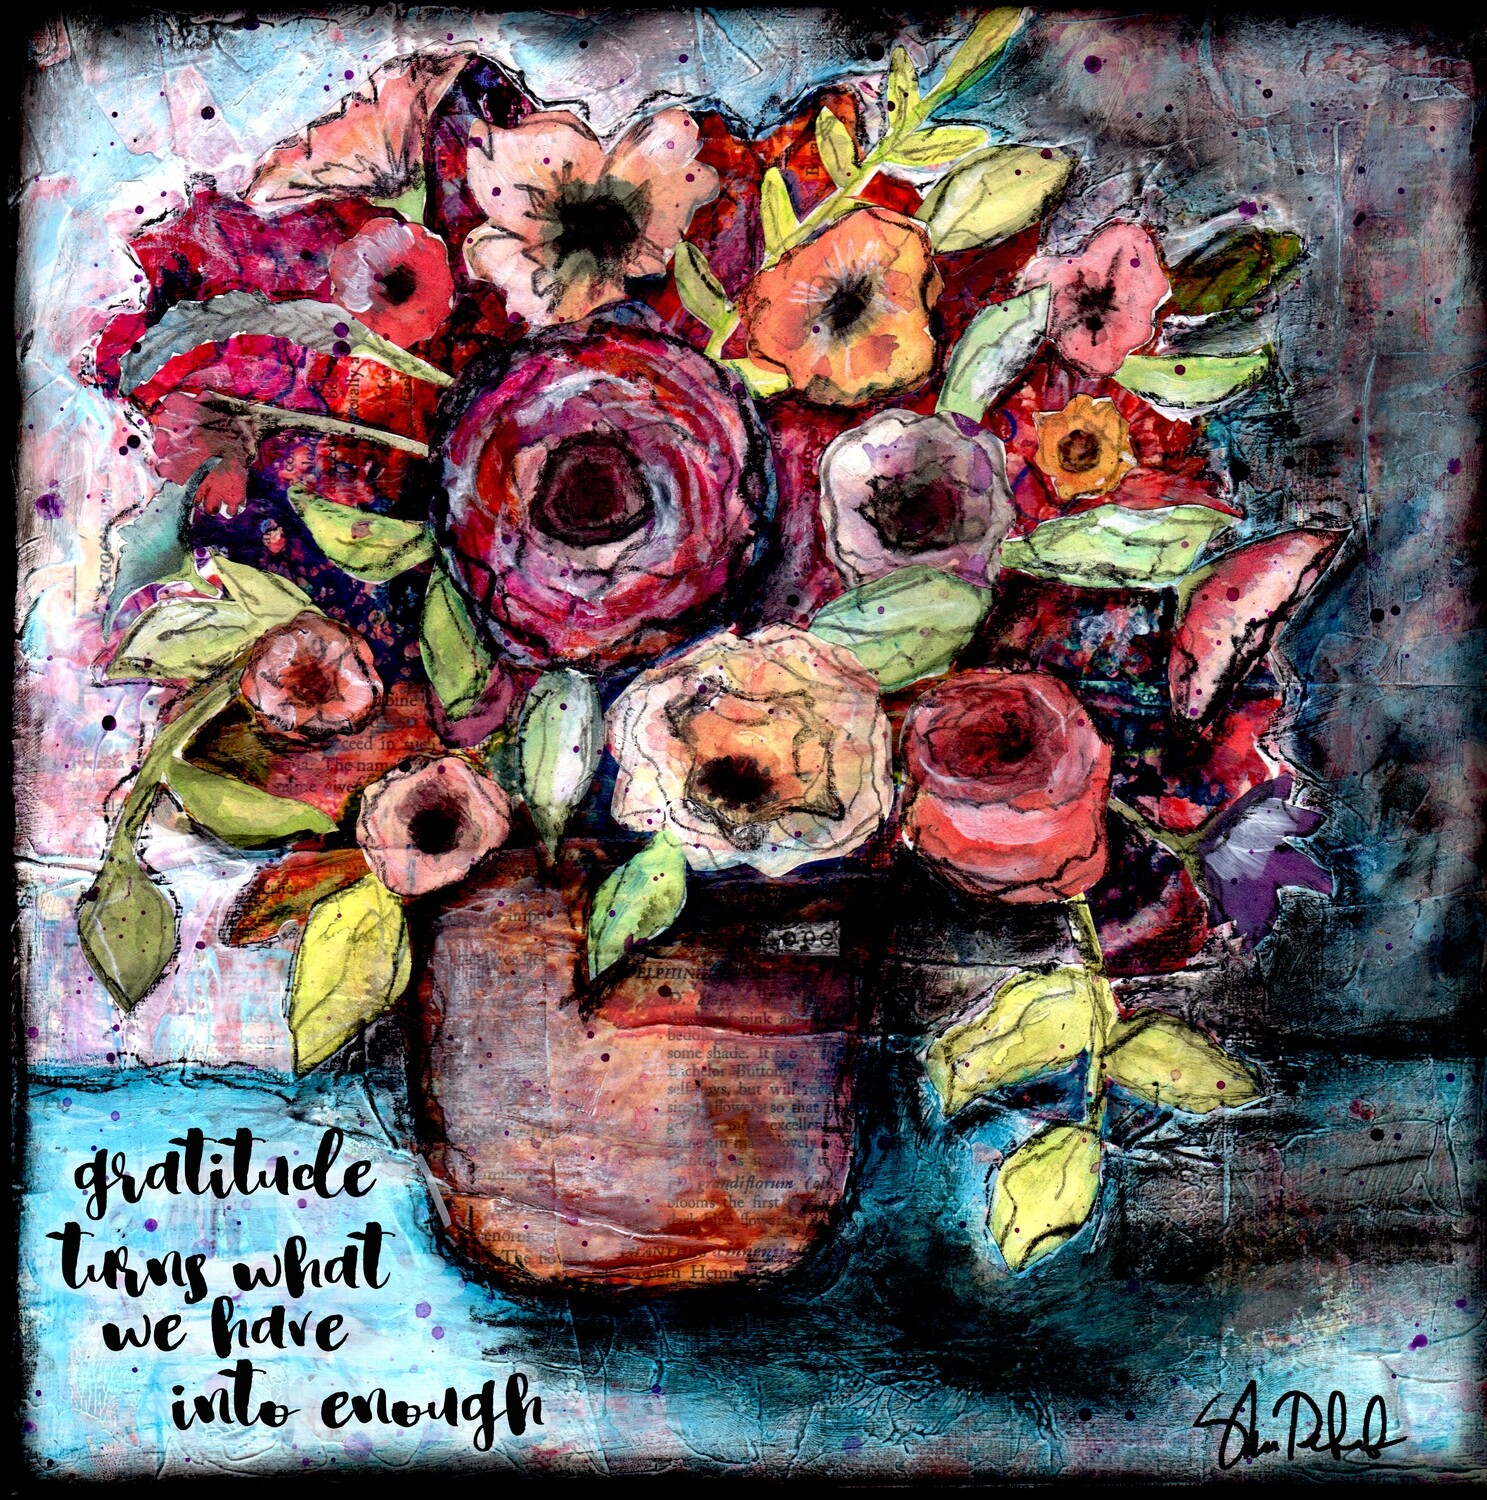 "Gratitude turns what we have into enough" Print on Wood 8x8 Overstock no writing